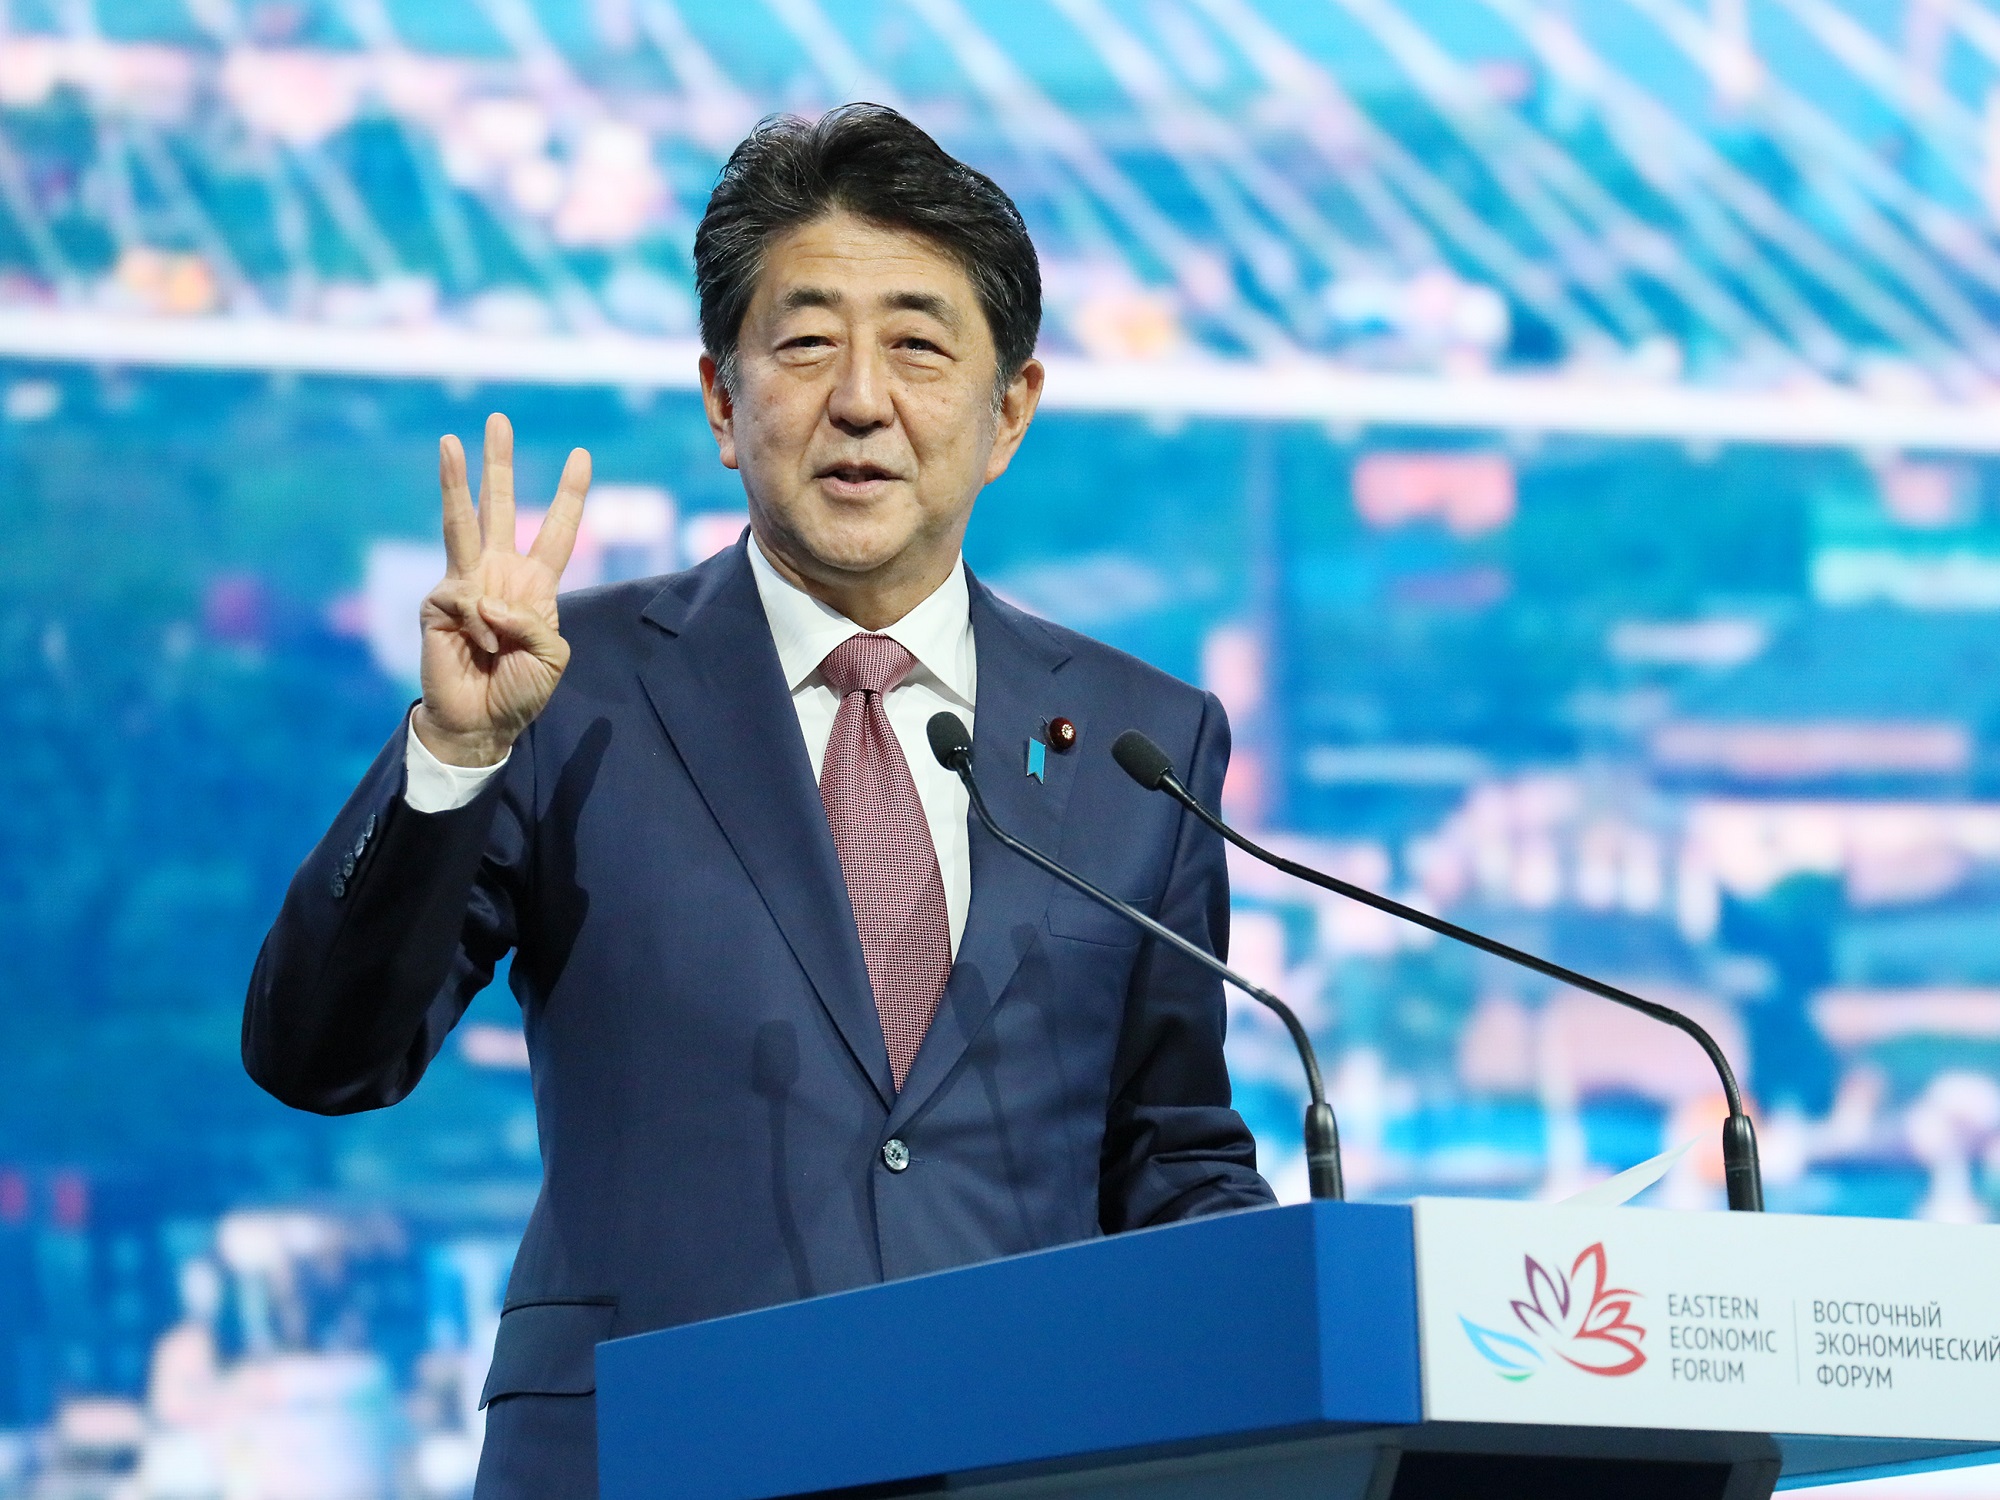 Photograph of the Prime Minister giving a speech at the plenary session of the Eastern Economic Forum (3)